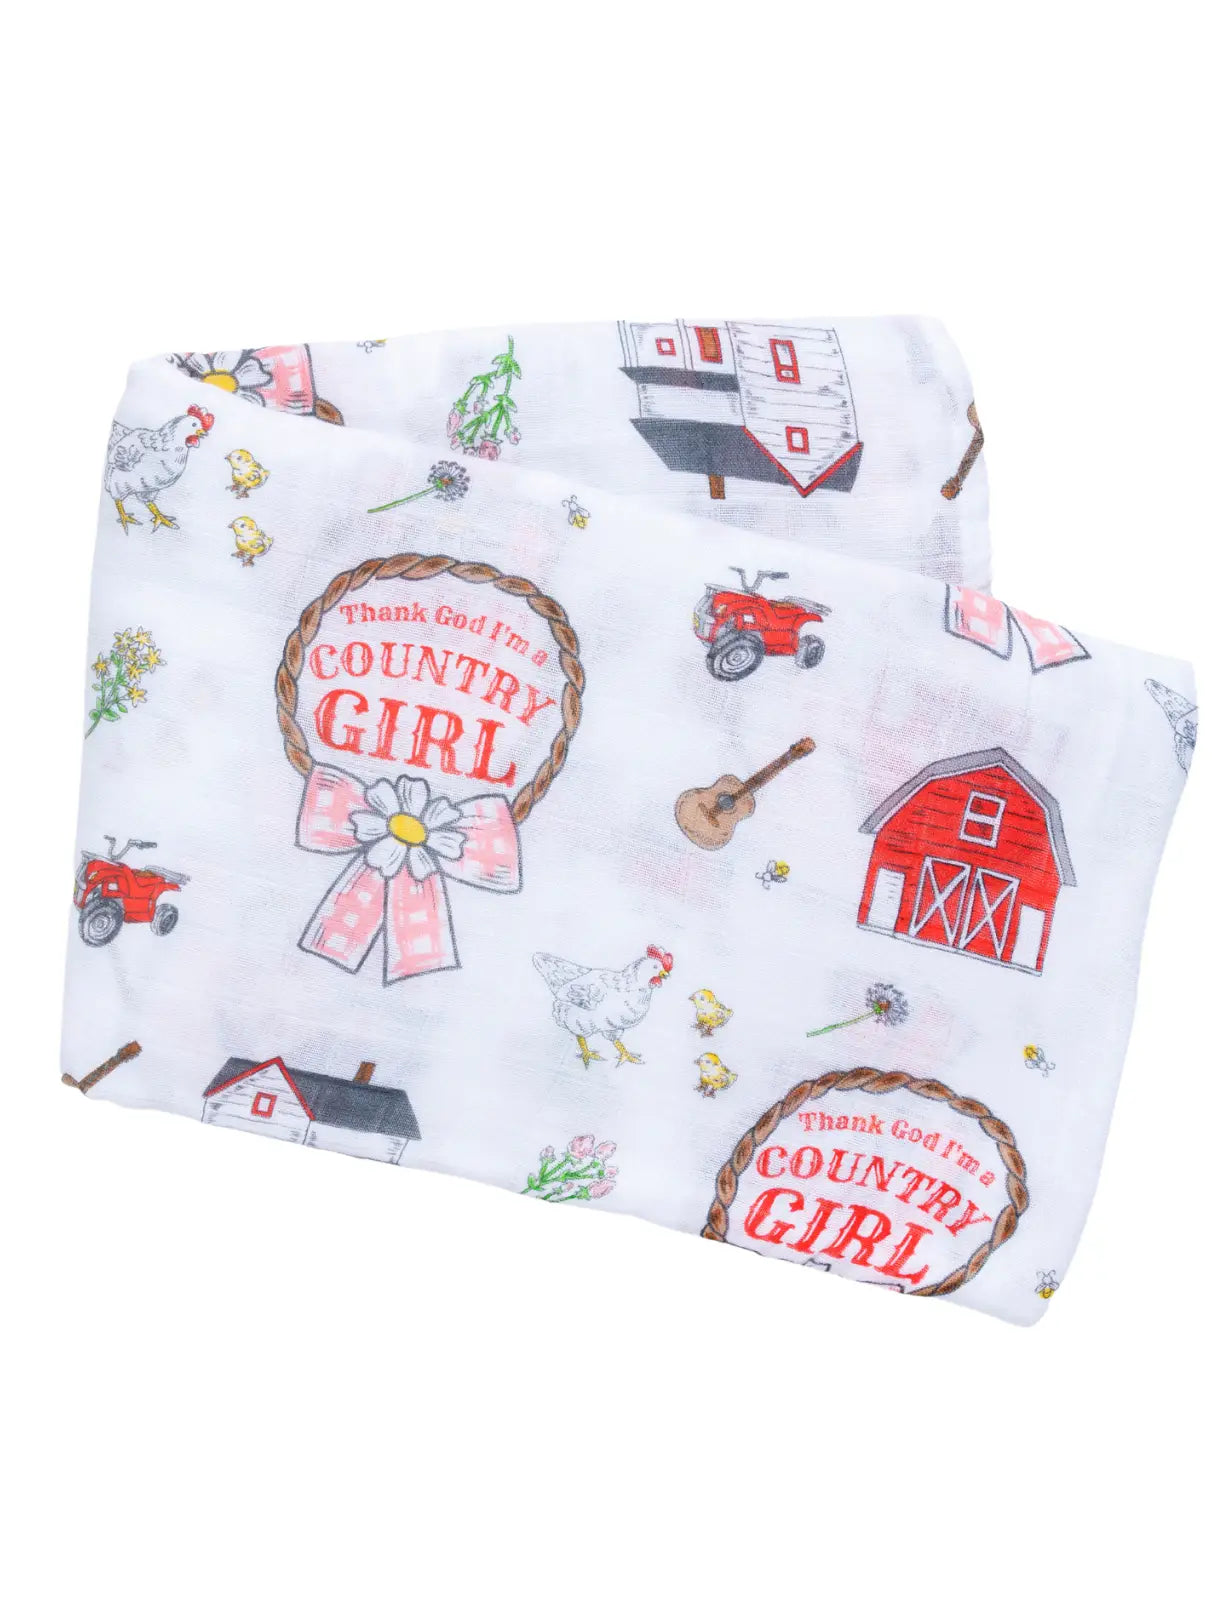 Country Girl Themed Swaddle Blanket